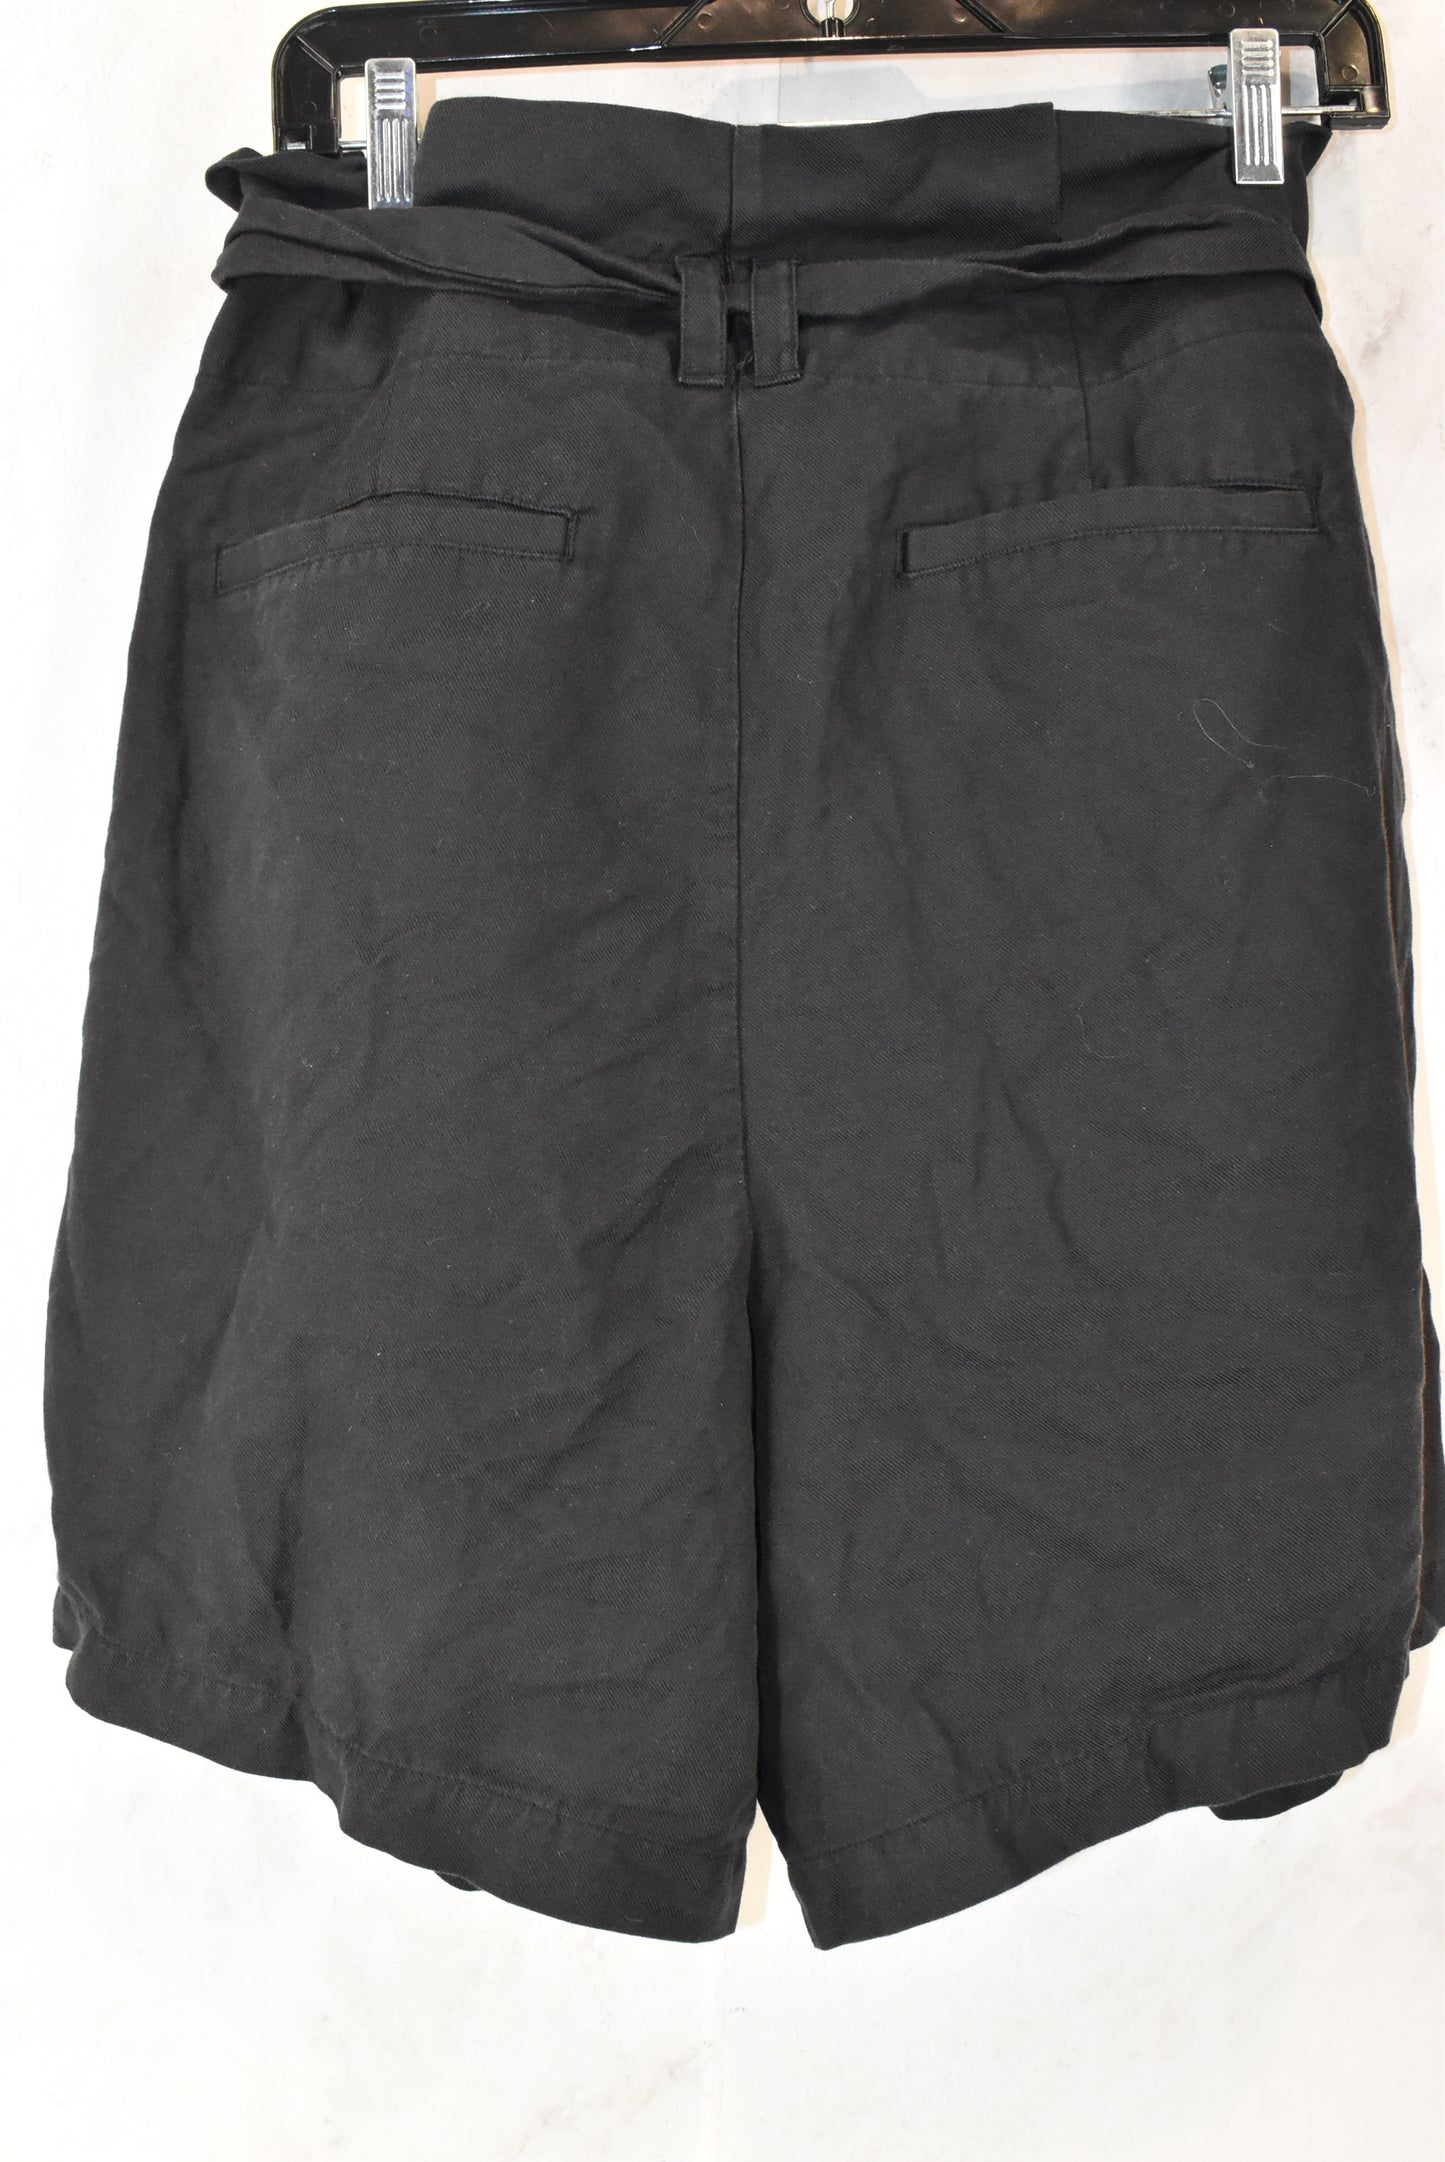 Shorts By Kim Rogers  Size: 16